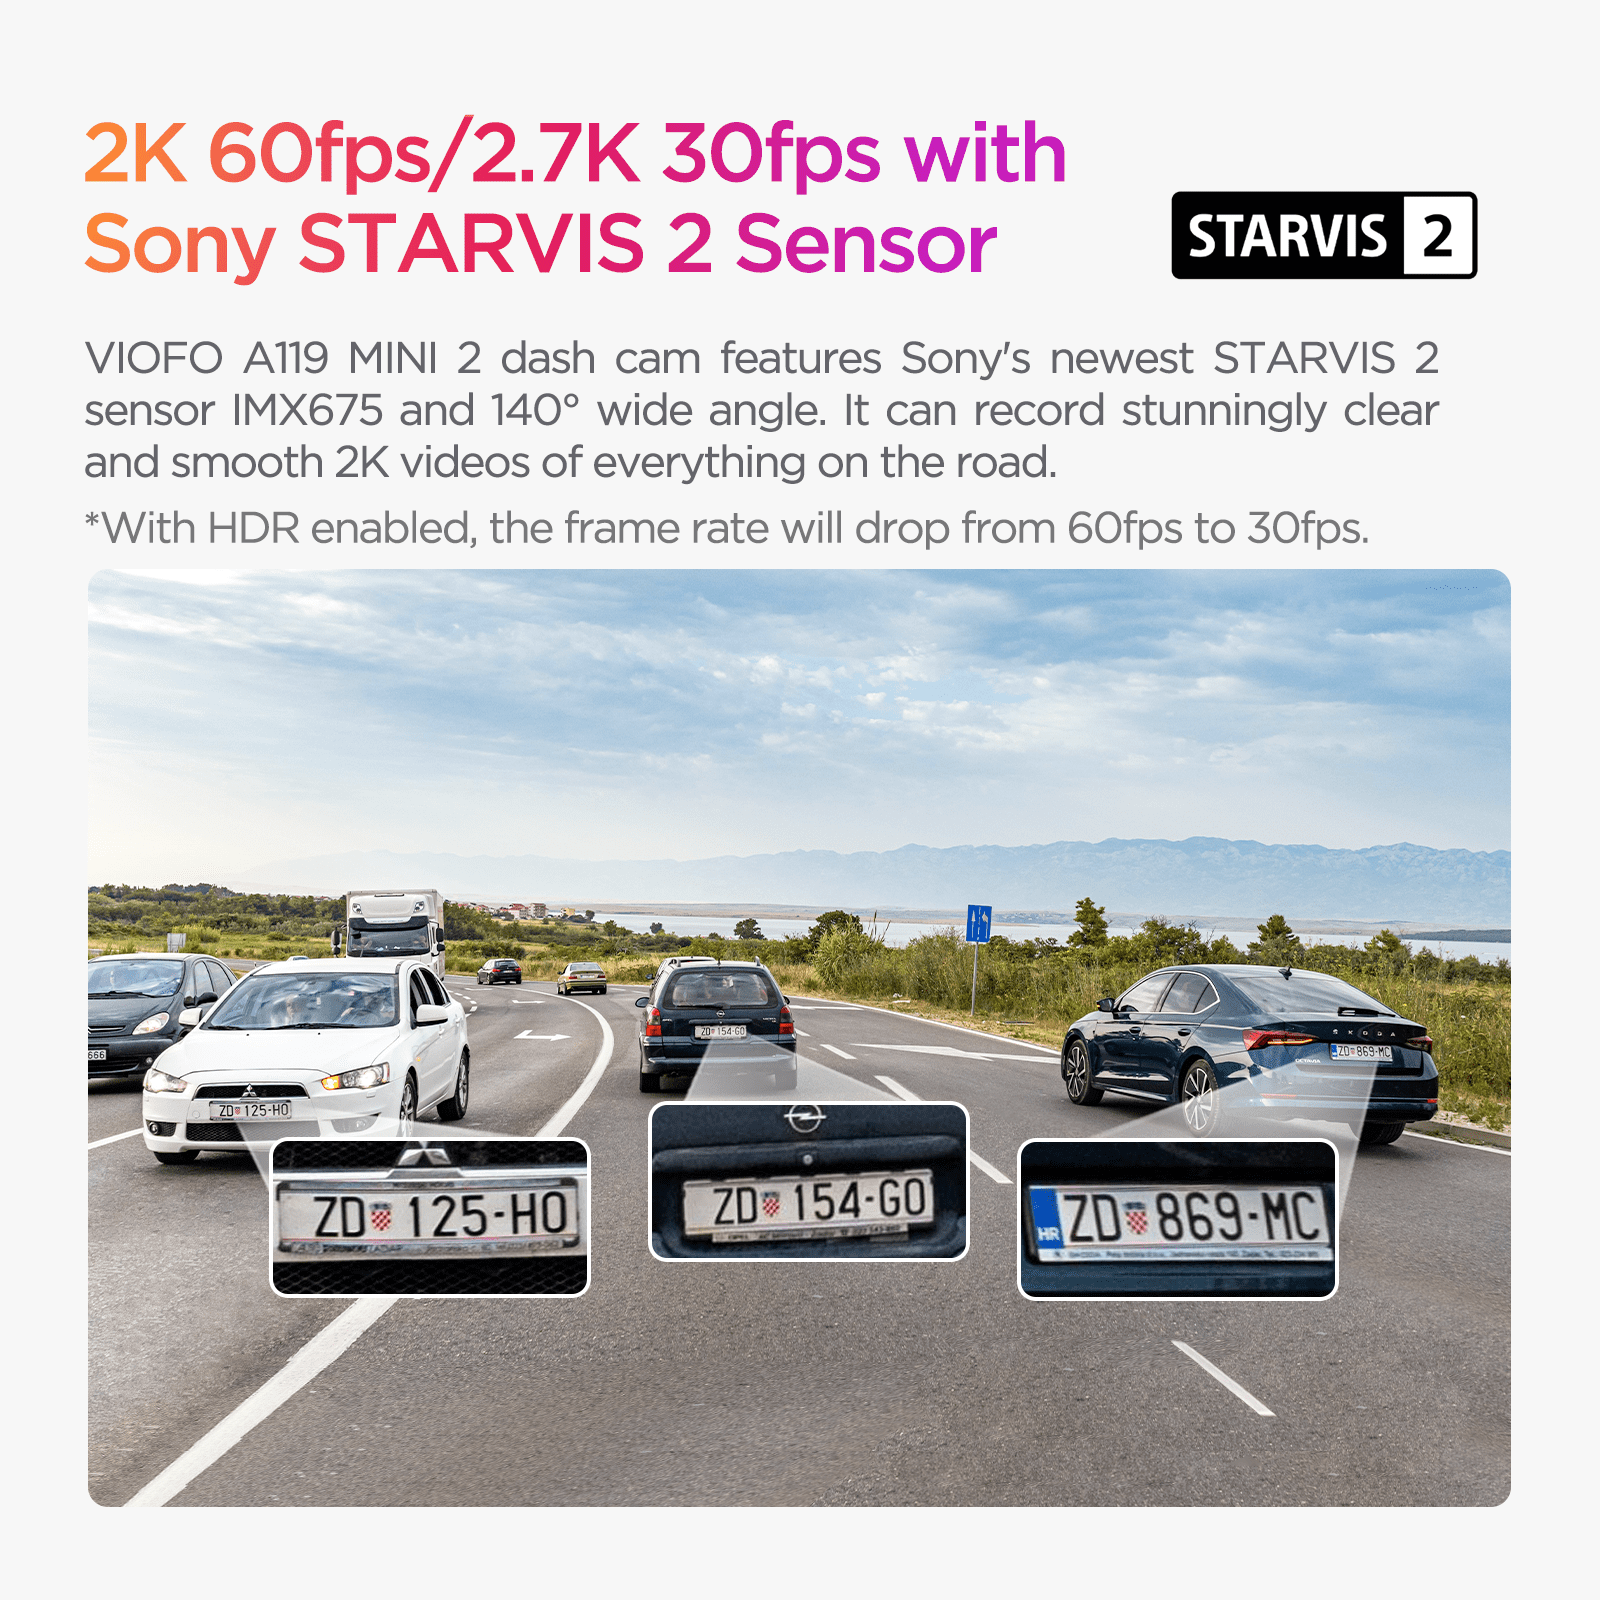 A119 MINI 2 Best-In-Class 2K HDR Image Quality, Sony STARVIS 2